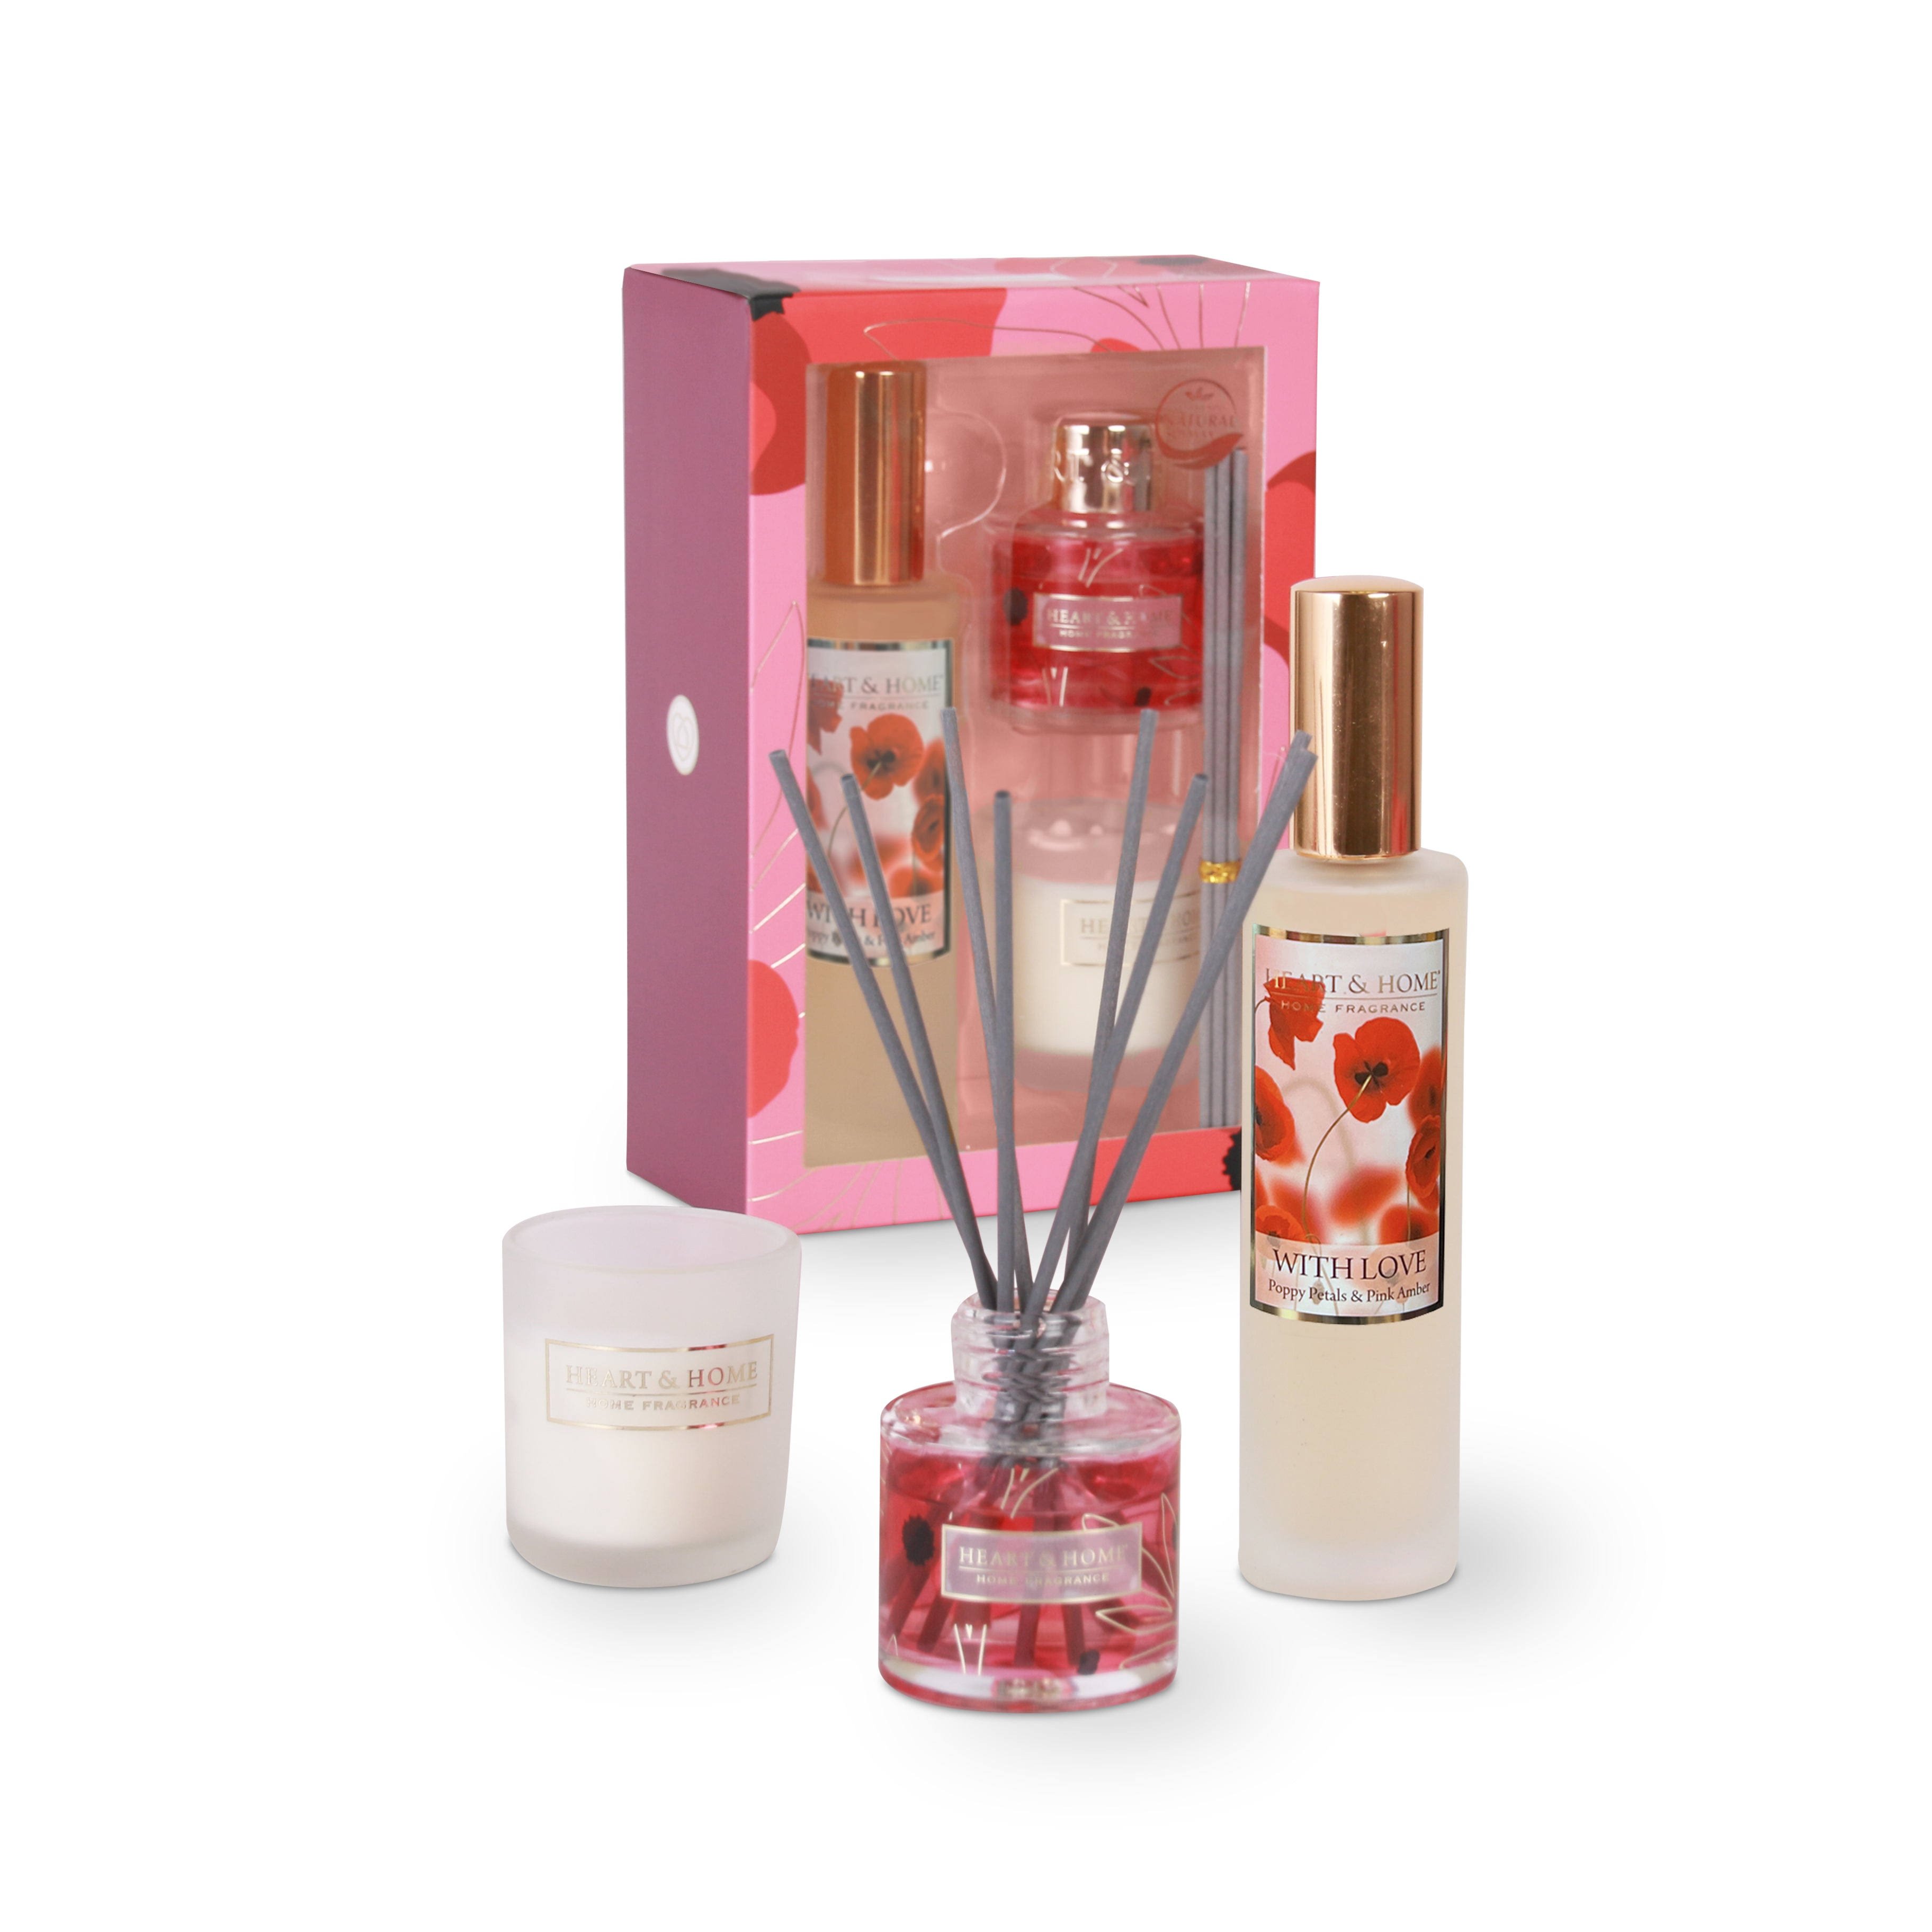 Heart & Home Home Fragrancing Gift Set With Love